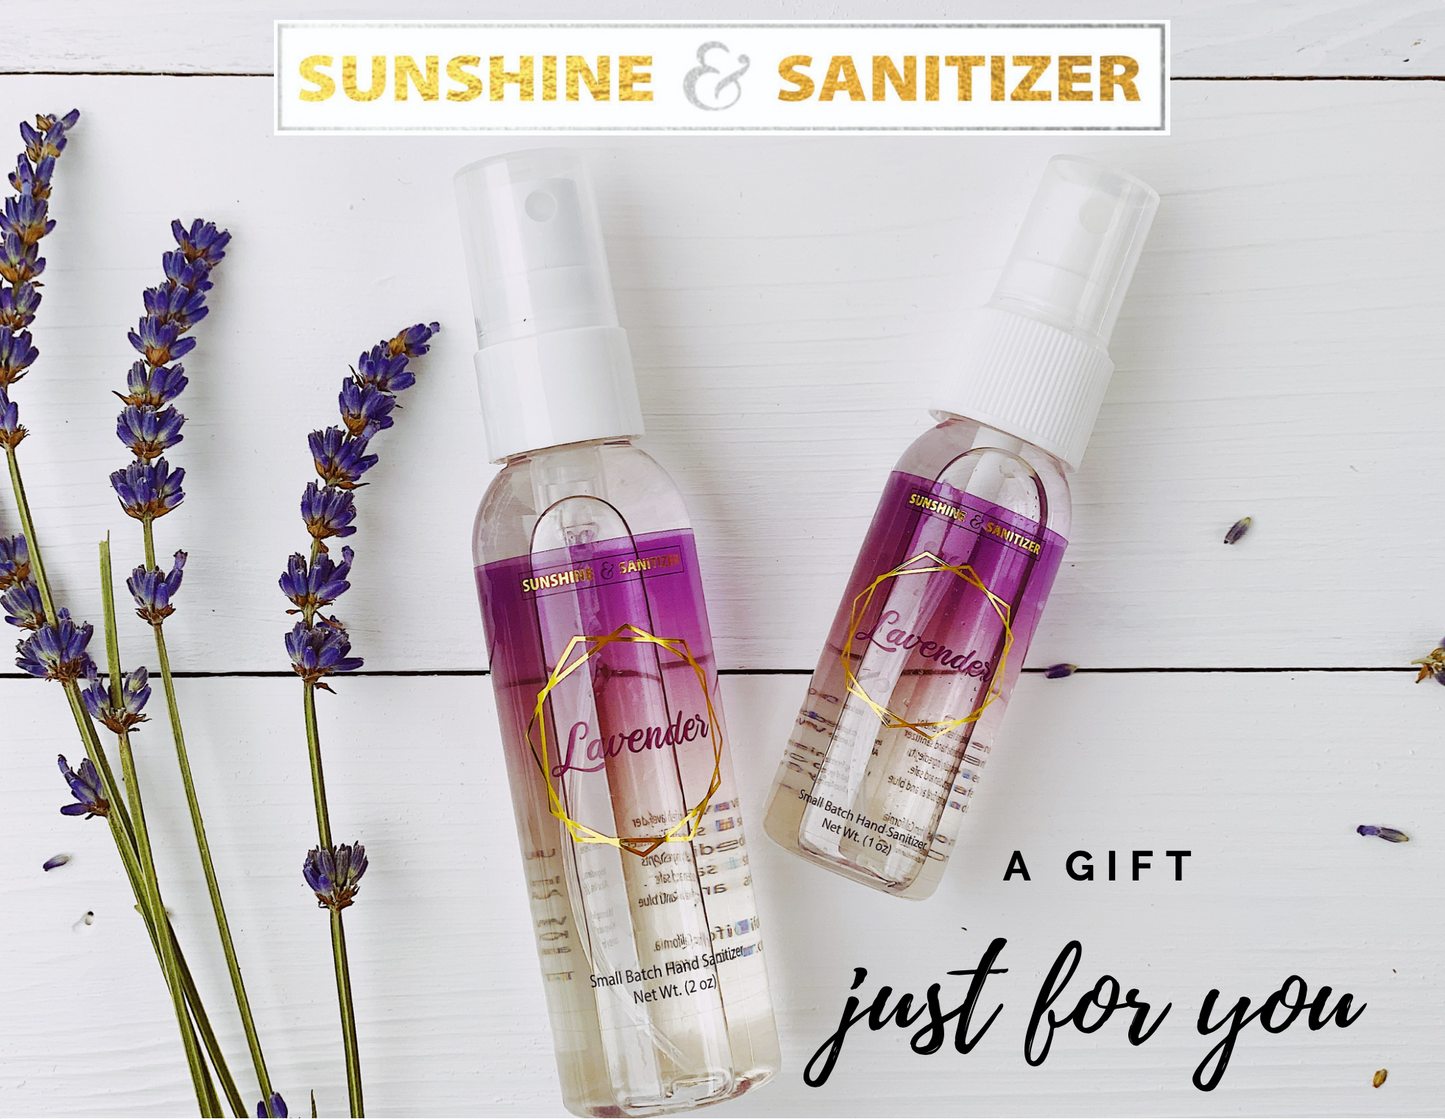 Hand Sanitizer with Aloe & Essential Oils by Sunshine & Sanitizer - Gift Card